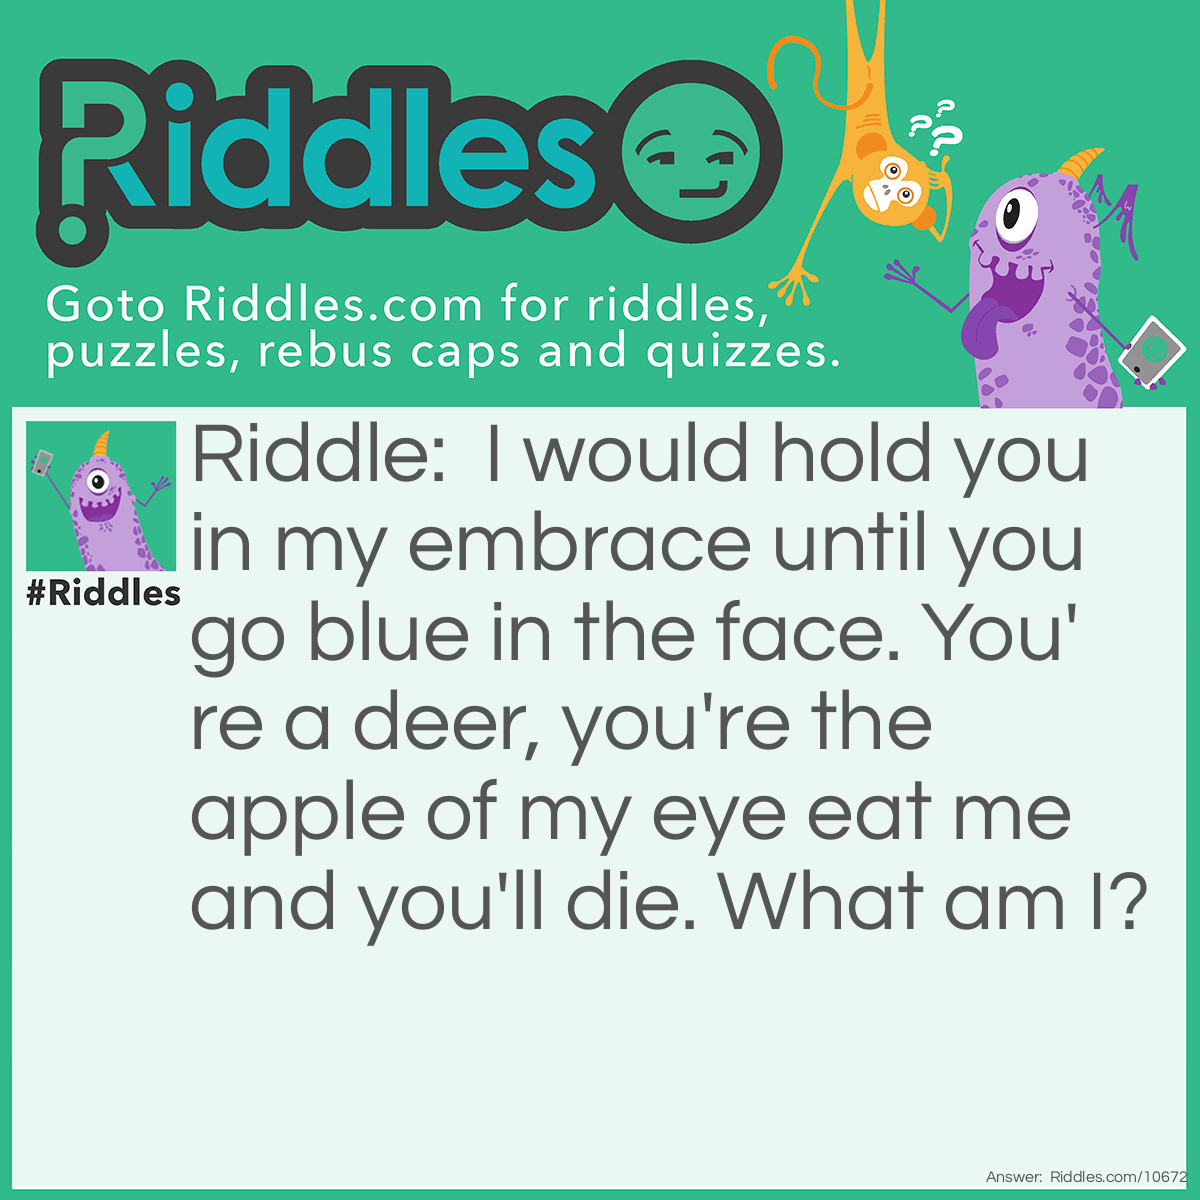 Riddle: I would hold you in my embrace until you go blue in the face. You're a deer, you're the apple of my eye eat me and you'll die. What am I? Answer: Cyanide.